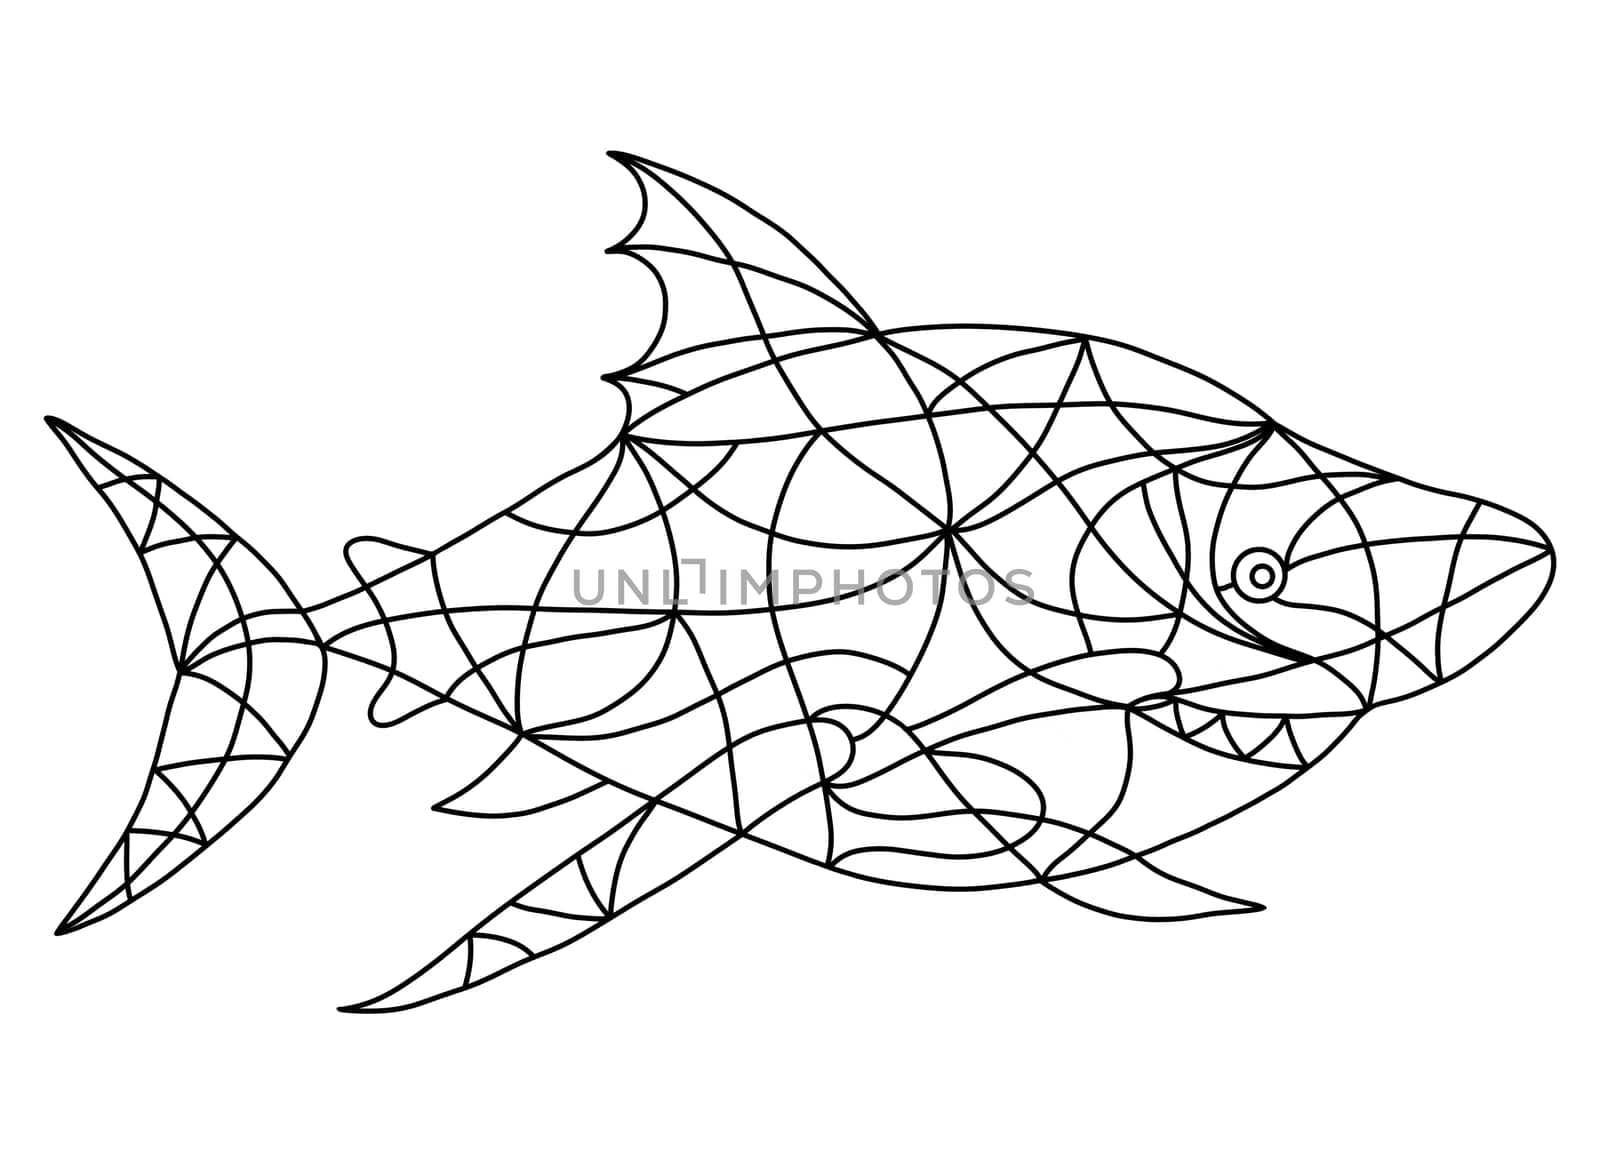 Black and White Shark in Stained Glass Window Style. Mosaic Tiles Shark Isolated on White Background. Coloring Book Pages for Adult.